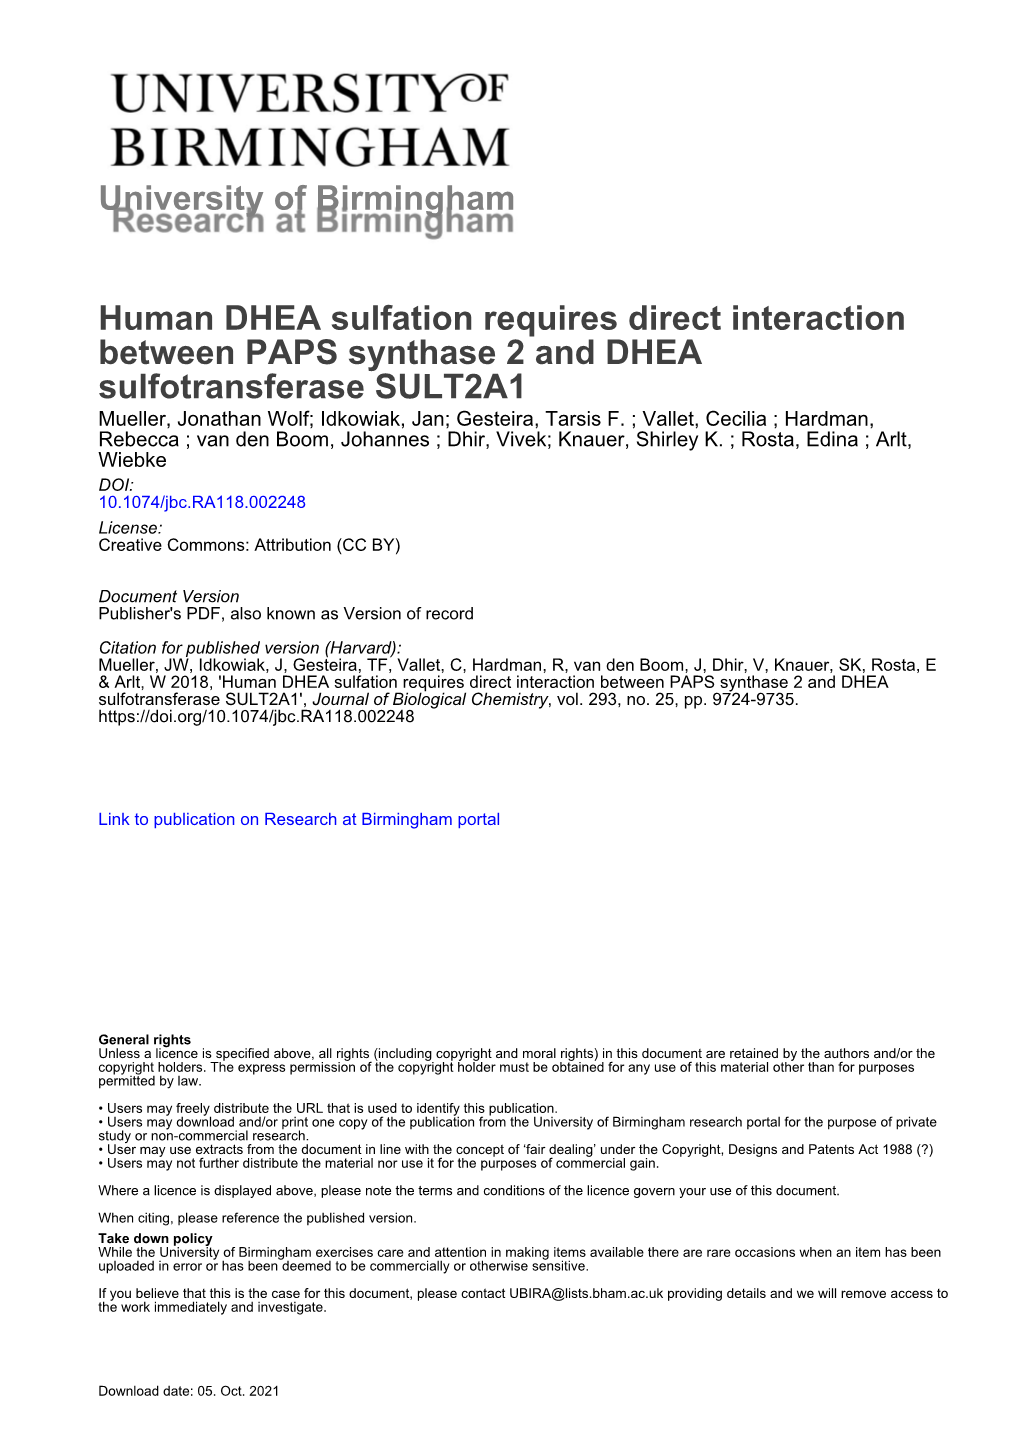 University of Birmingham Human DHEA Sulfation Requires Direct Interaction Between PAPS Synthase 2 and DHEA Sulfotransferase SULT